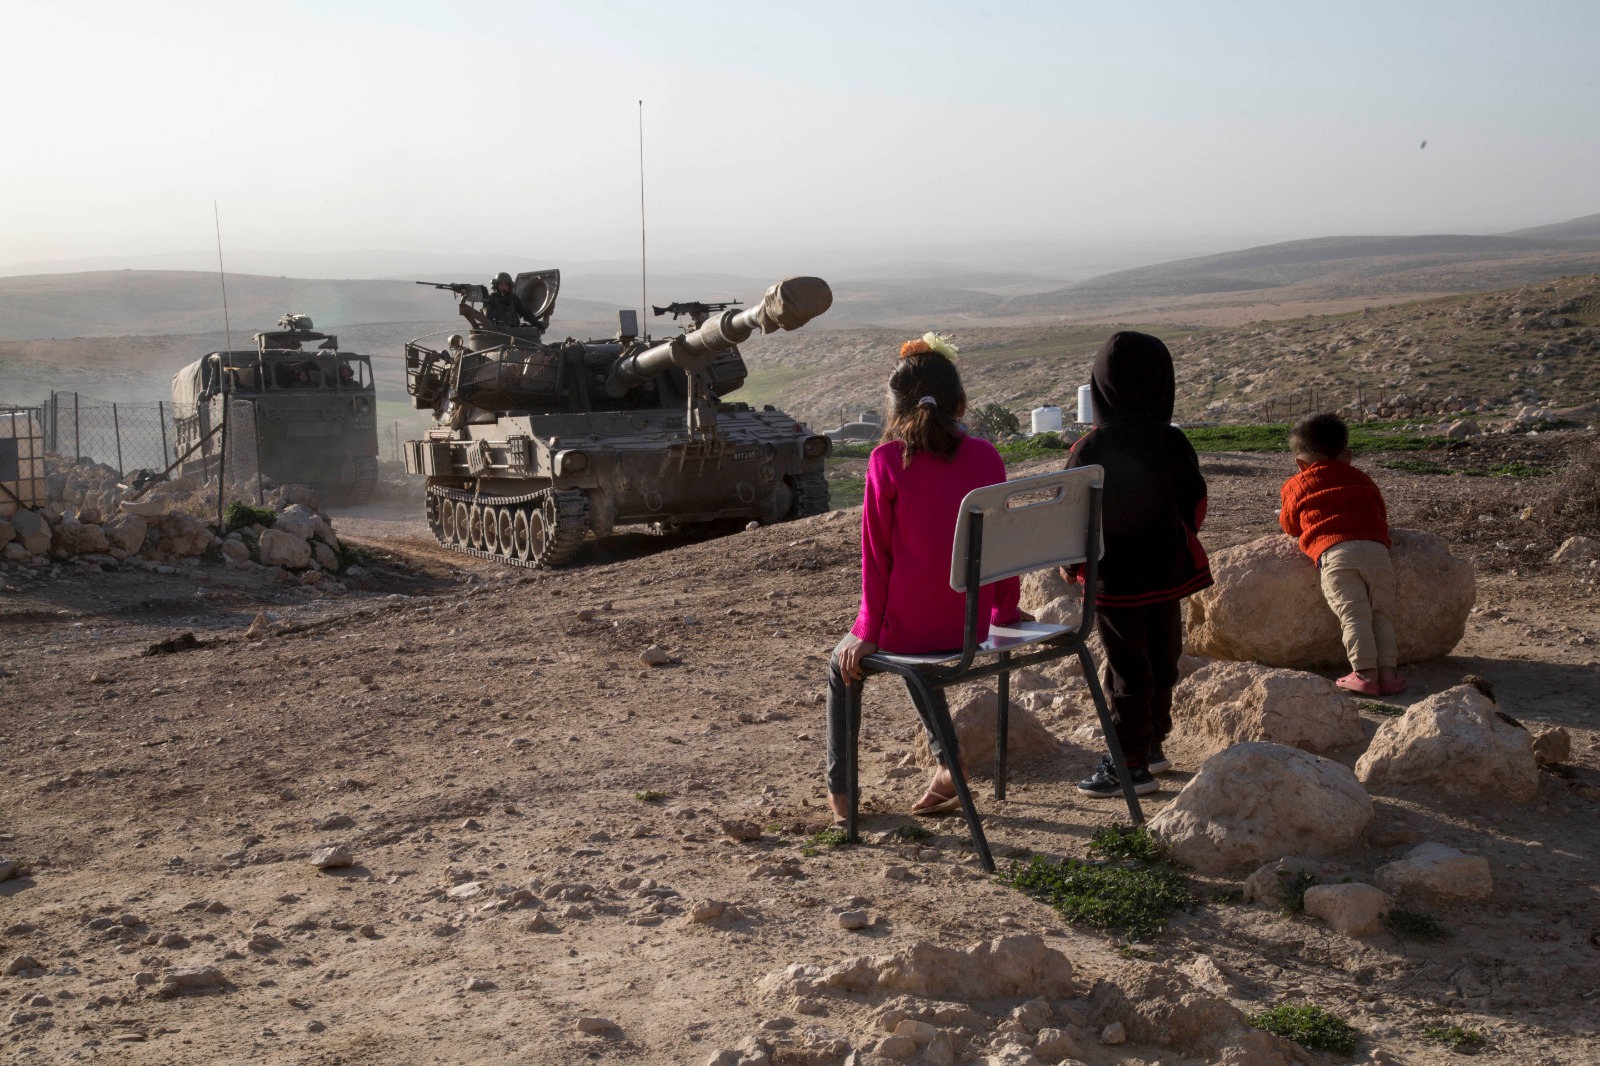 Children in Jinbeh, a Palestinian village in the occupied West Bank, watch as the Israeli army conducts a drill, February 3, 2020. (Keren Manor/Activestill.org)